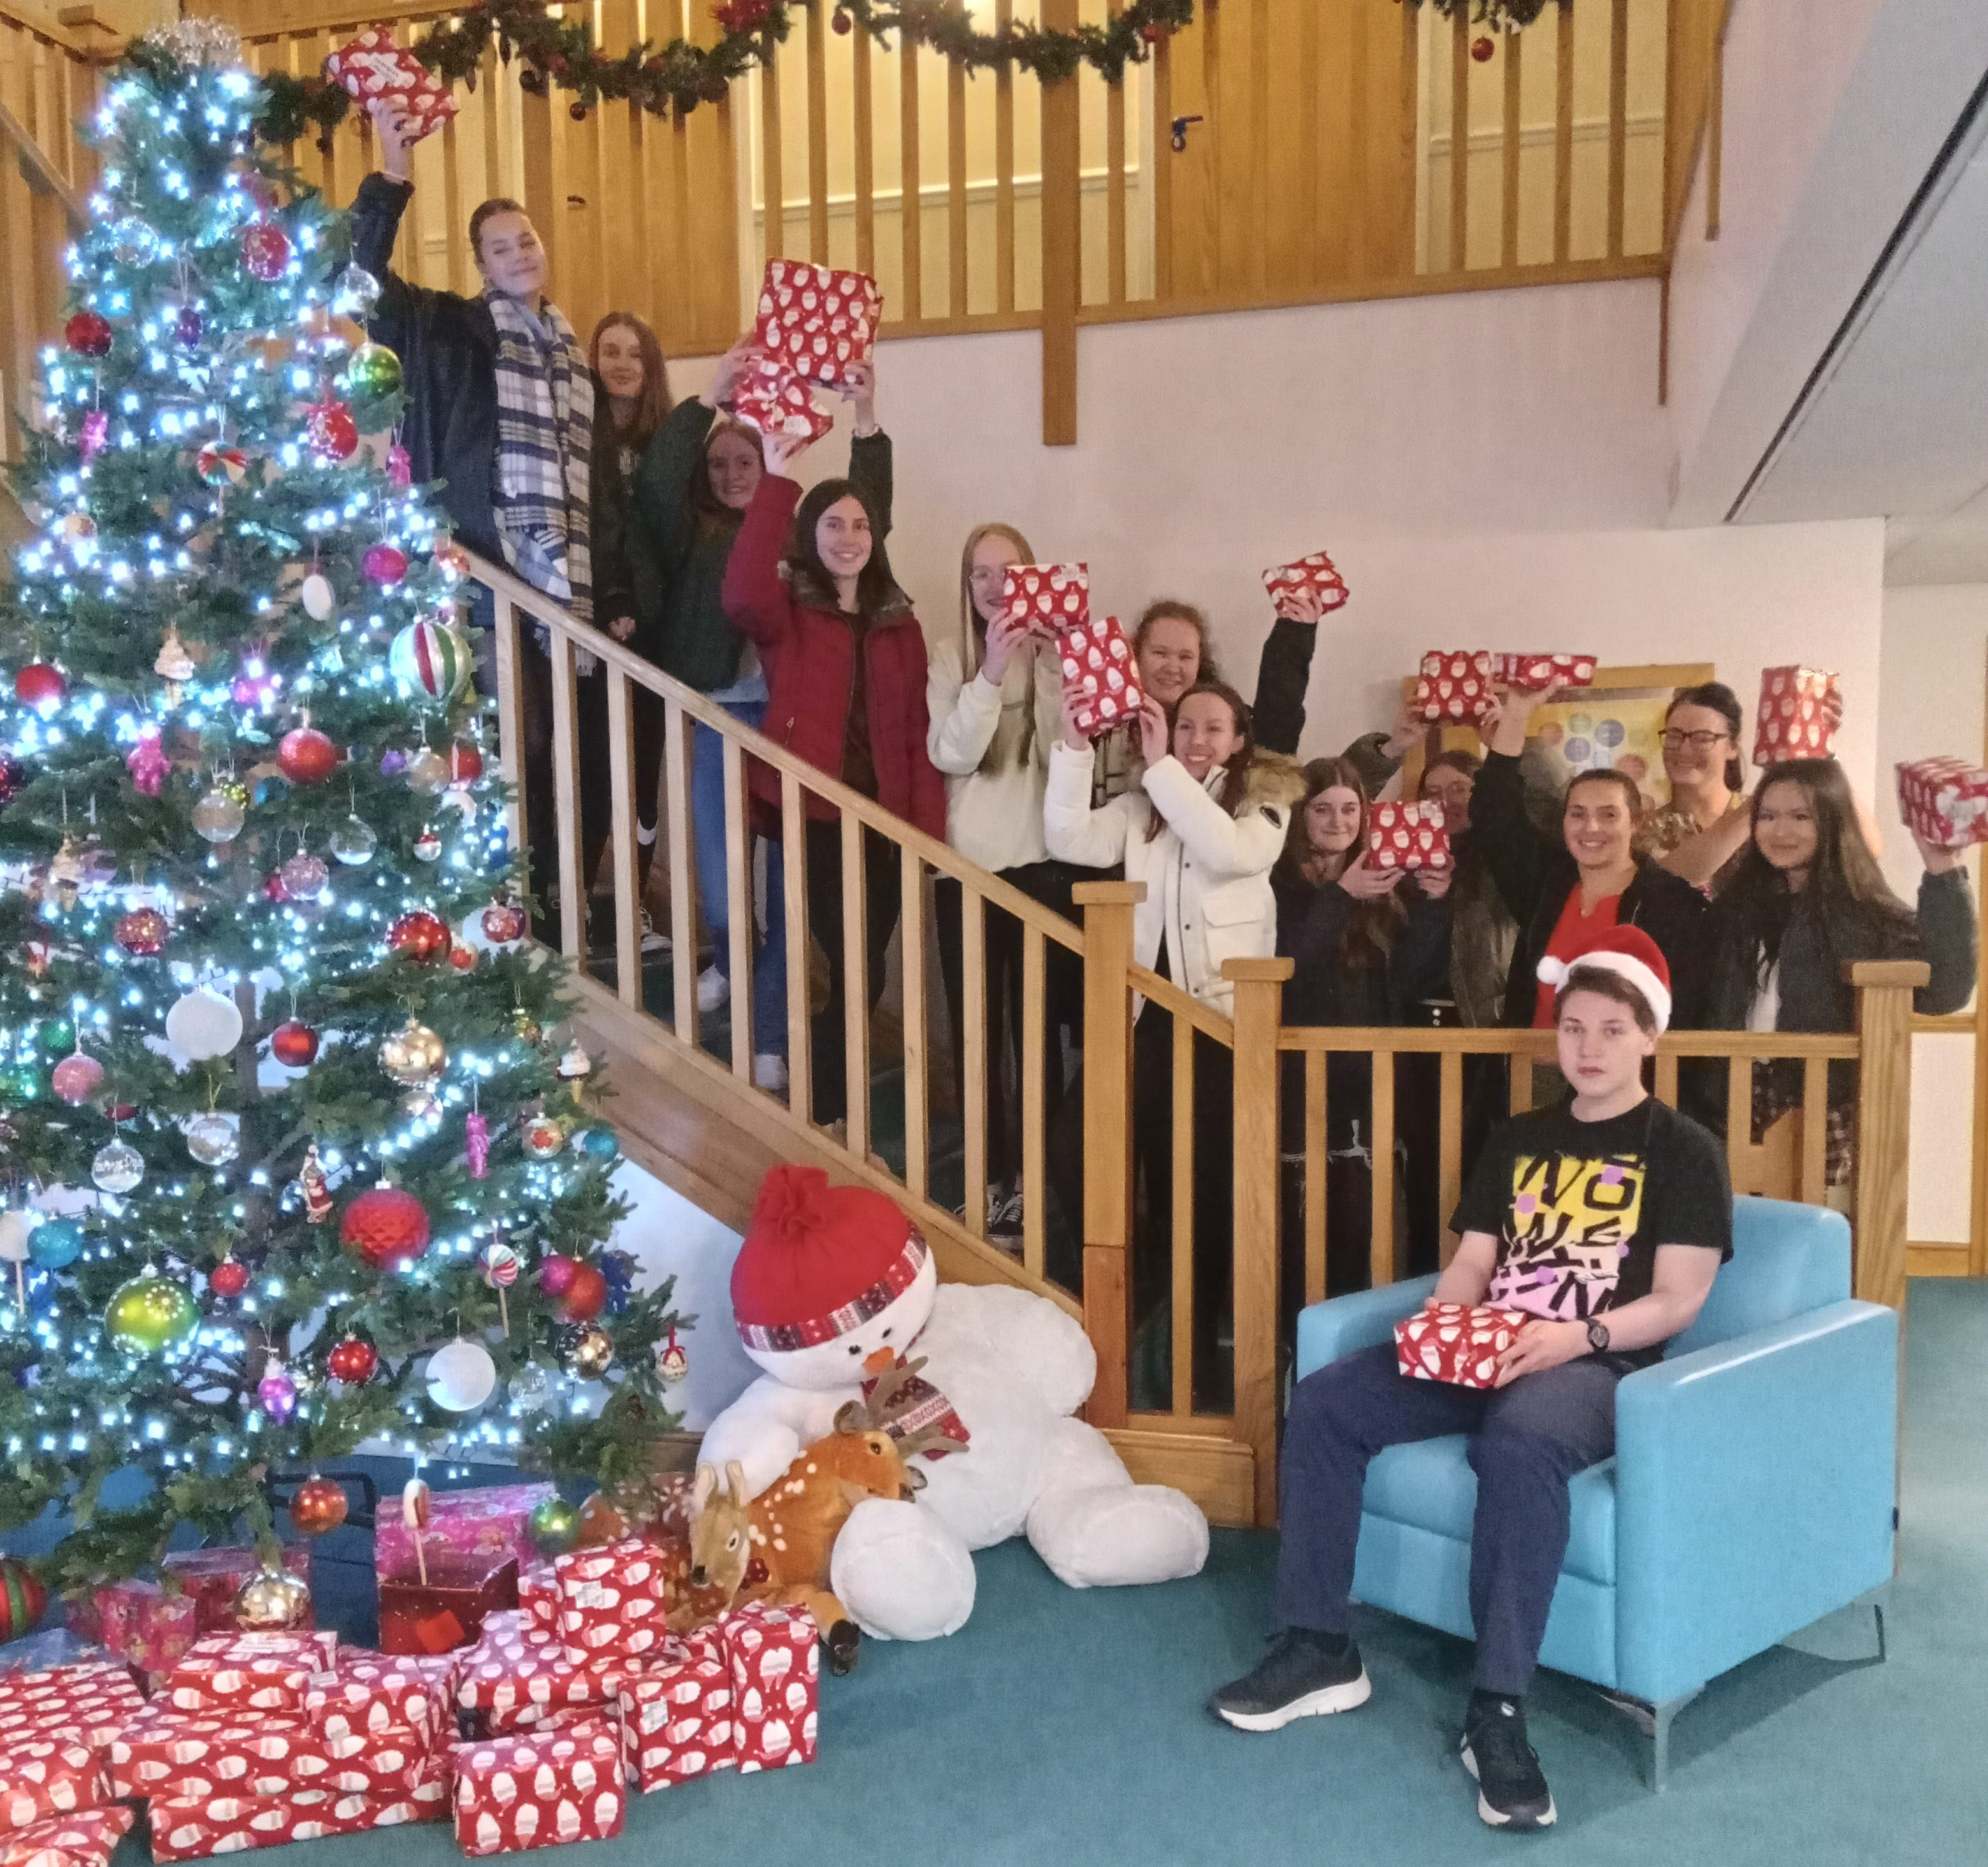 A group of young people standing on the staircase happy with a christmas tree and gifts wrapped around the tree